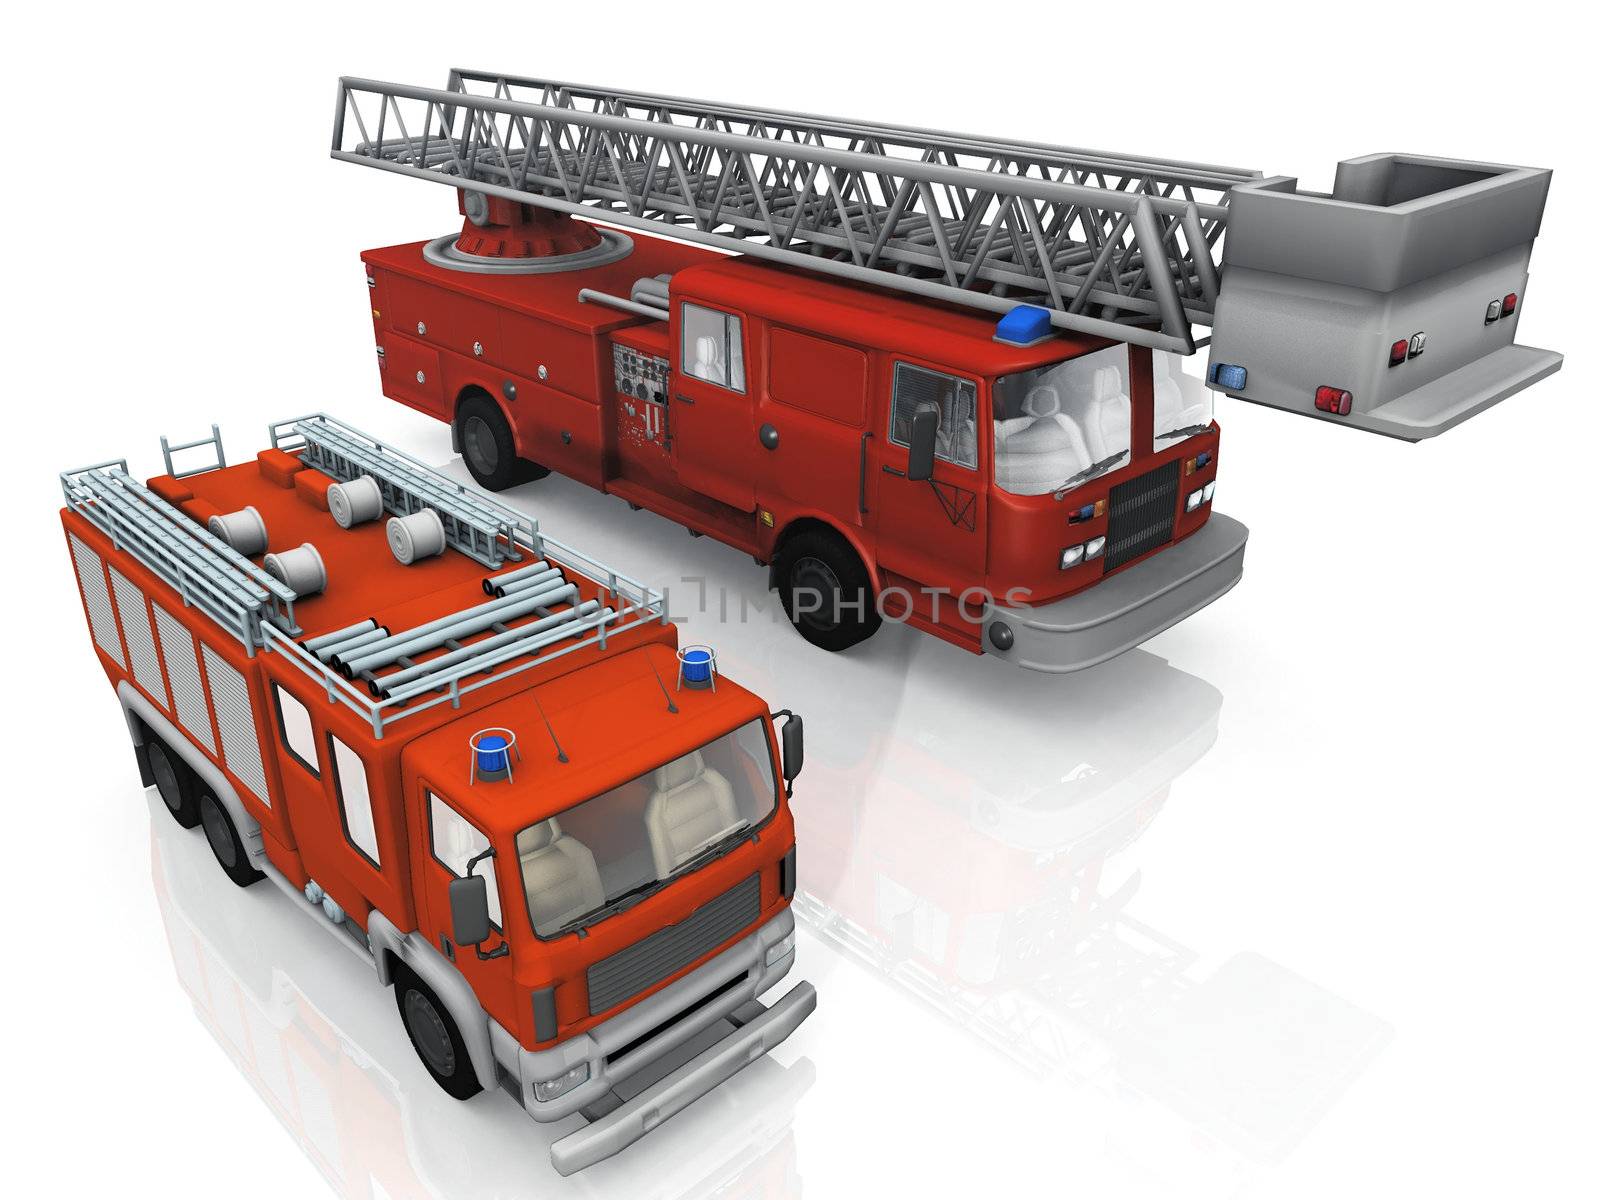 fire trucks on a white background